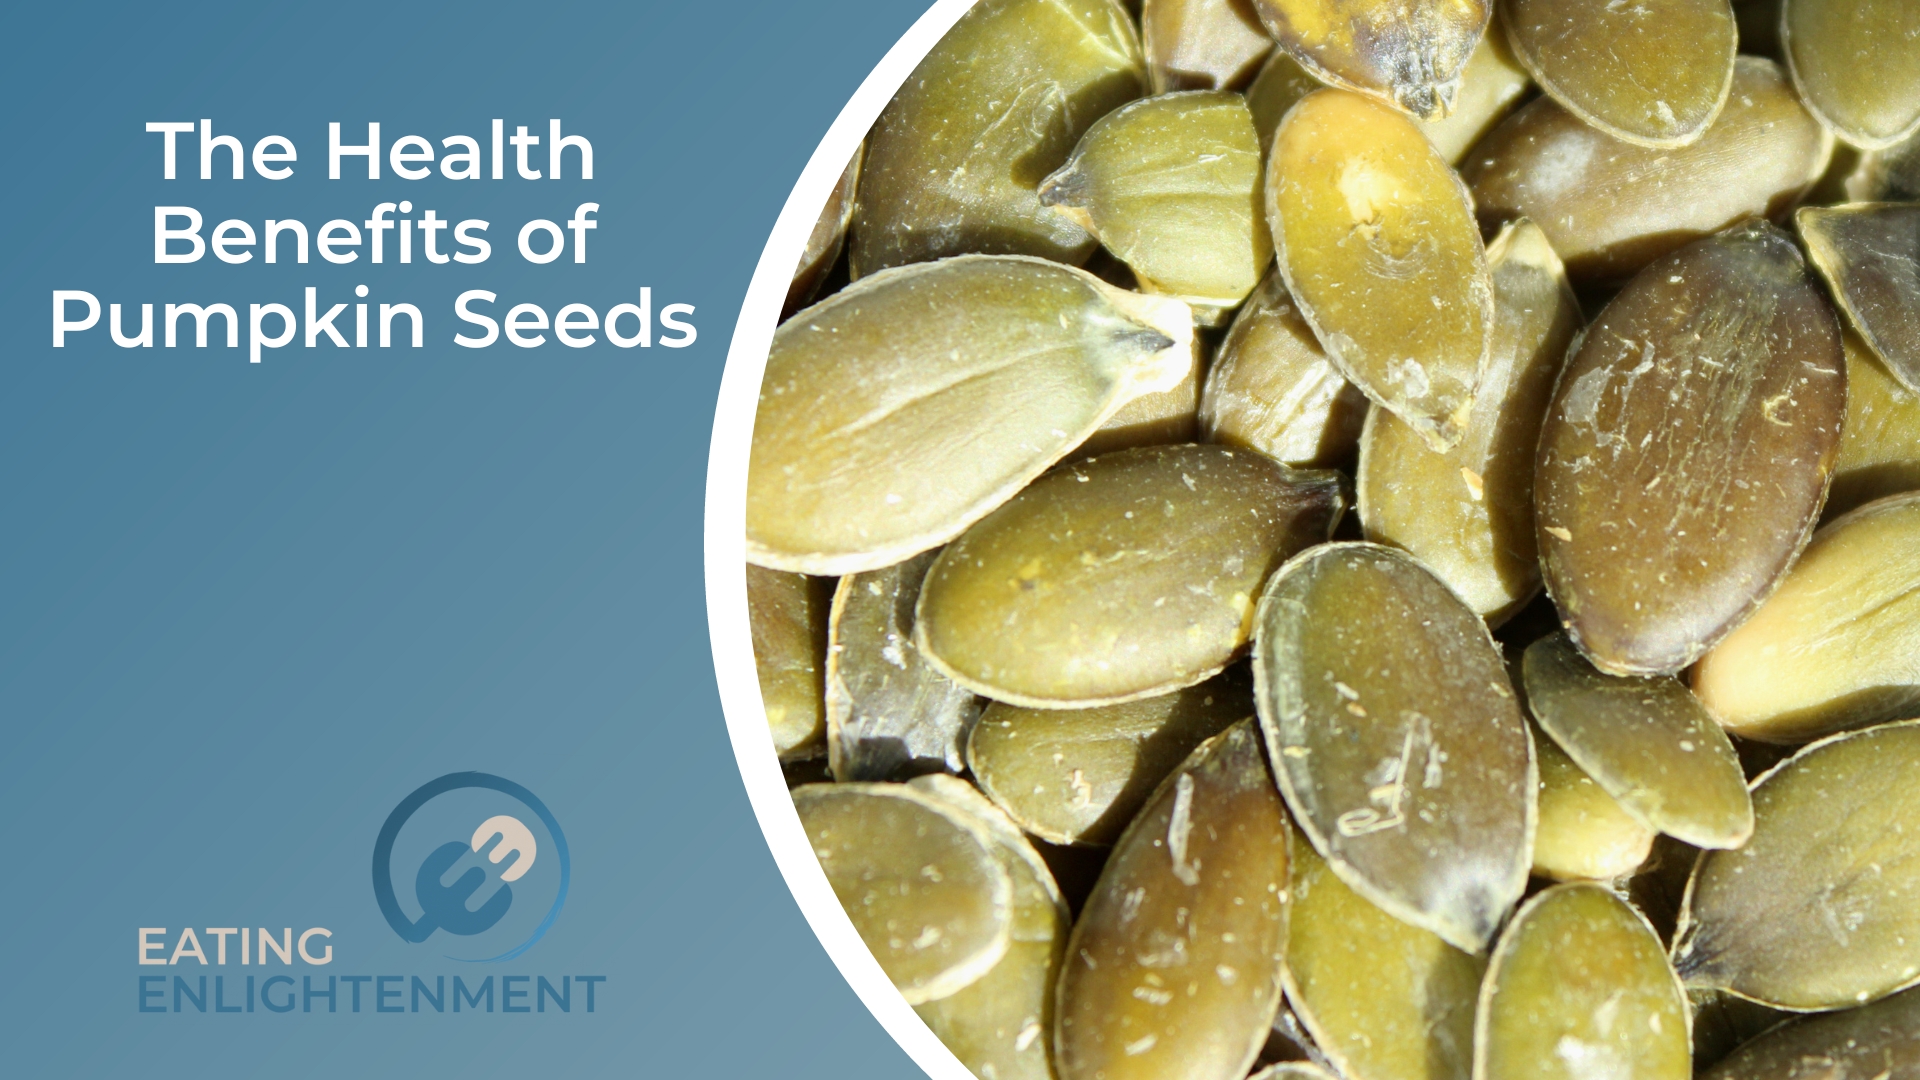 The Health Benefits of Pumpkin Seeds Why They're More Than Just a Snack